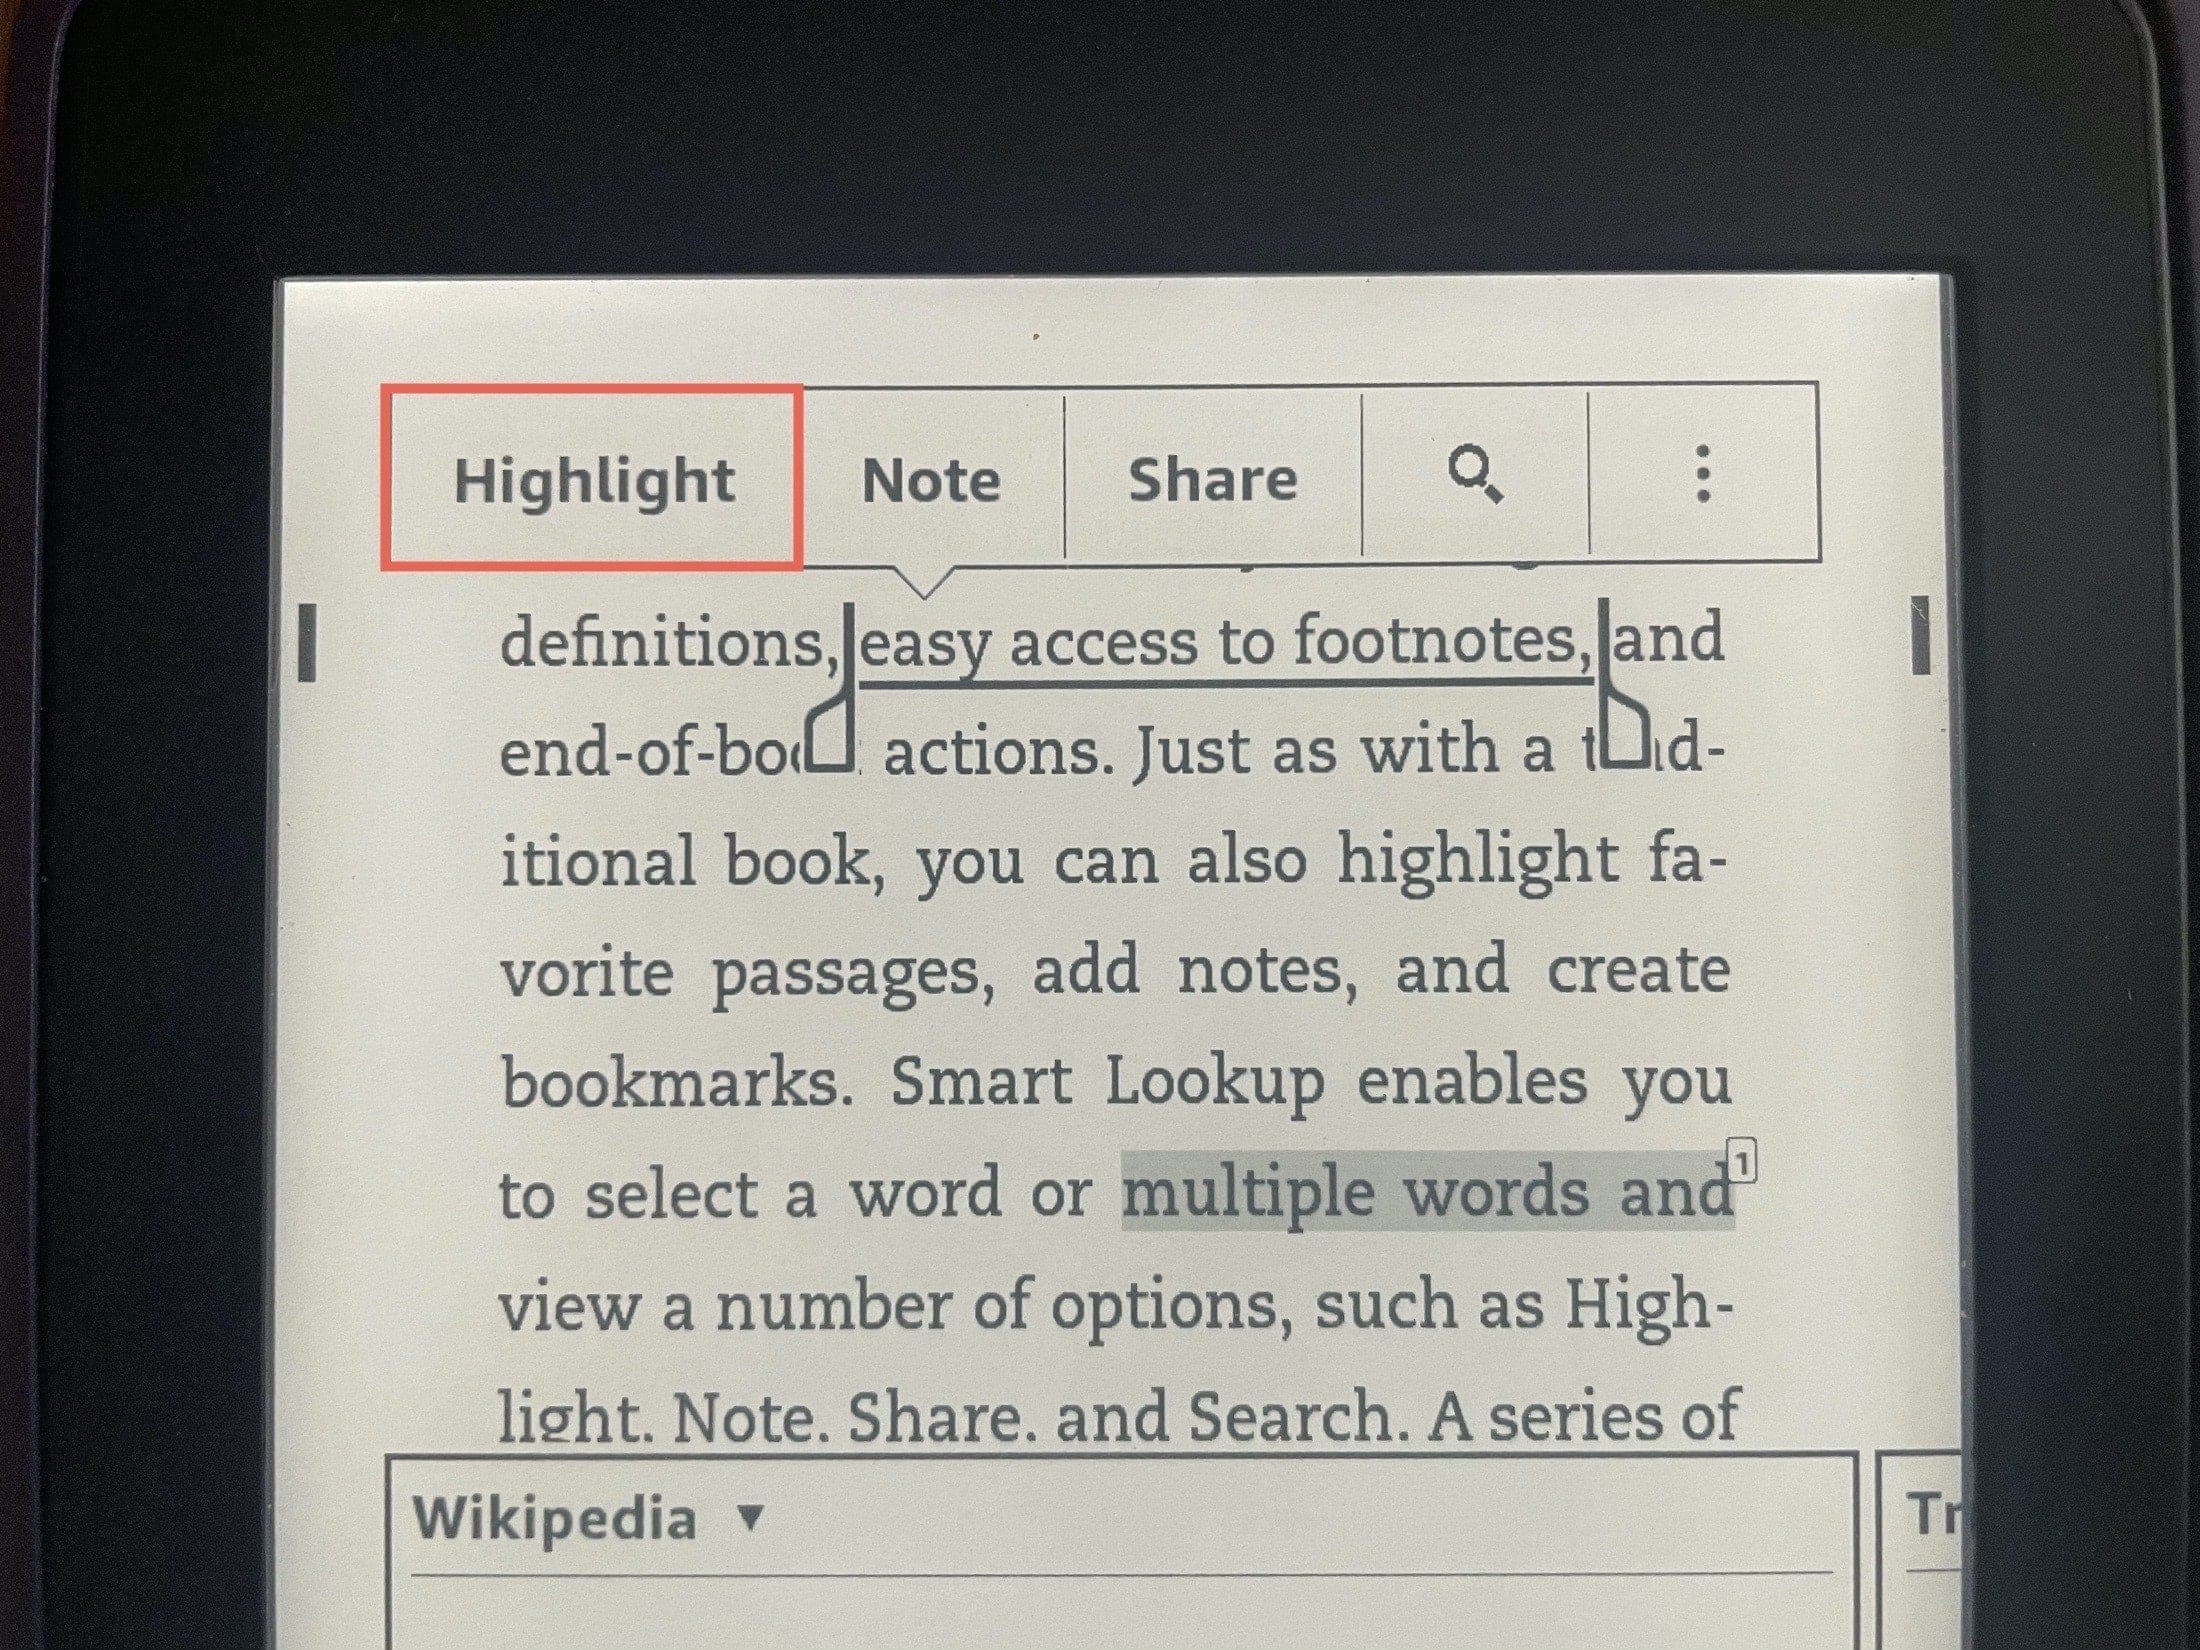 How to add and access highlights and notes on Kindle Paperwhite